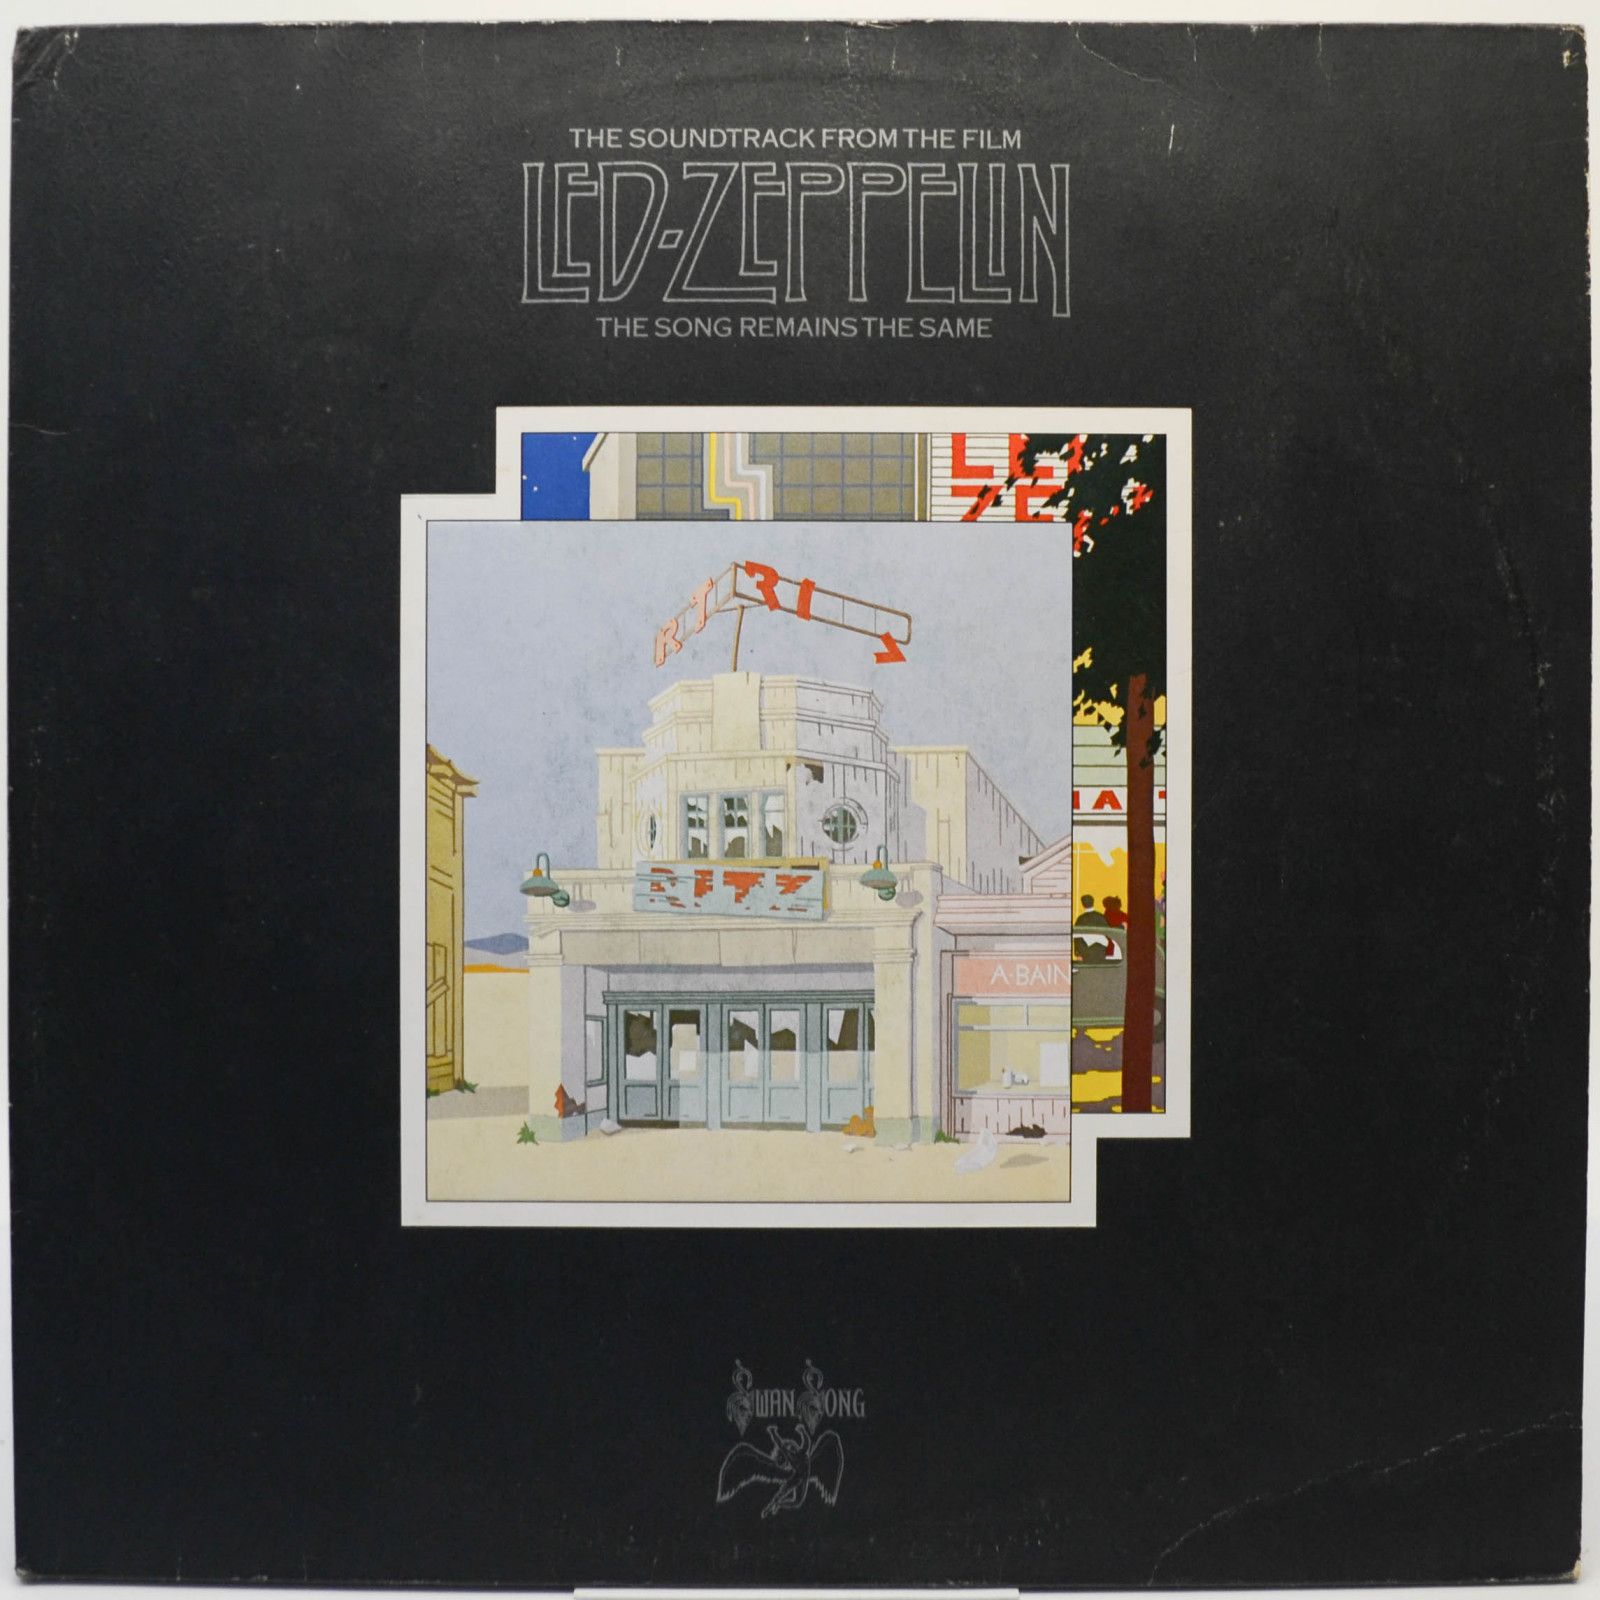 Led Zeppelin — The Soundtrack From The Film The Song Remains The Same (2LP), 1976